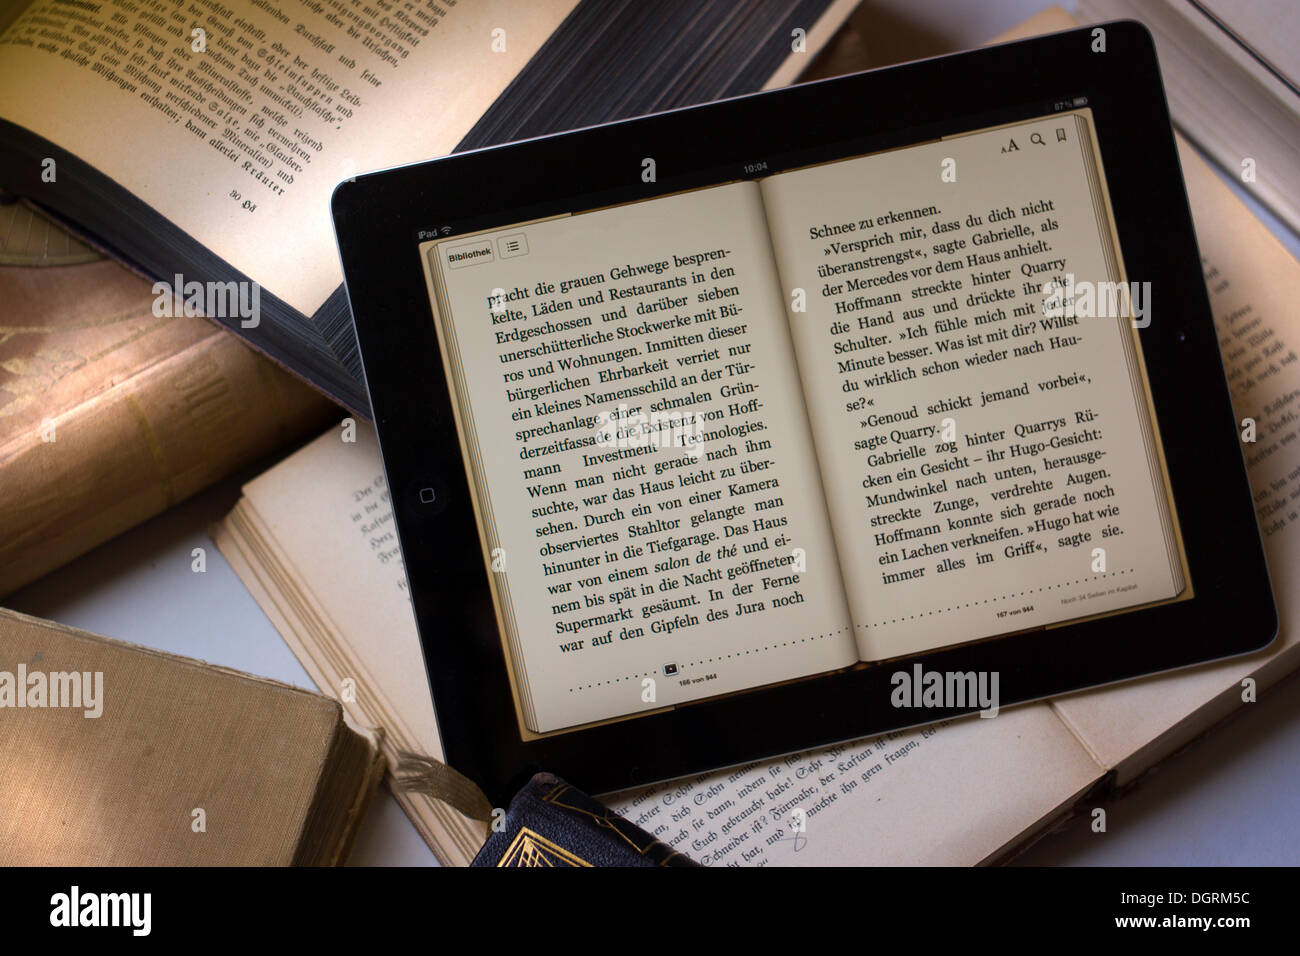 E-book reader beside old books, Germany Stock Photo